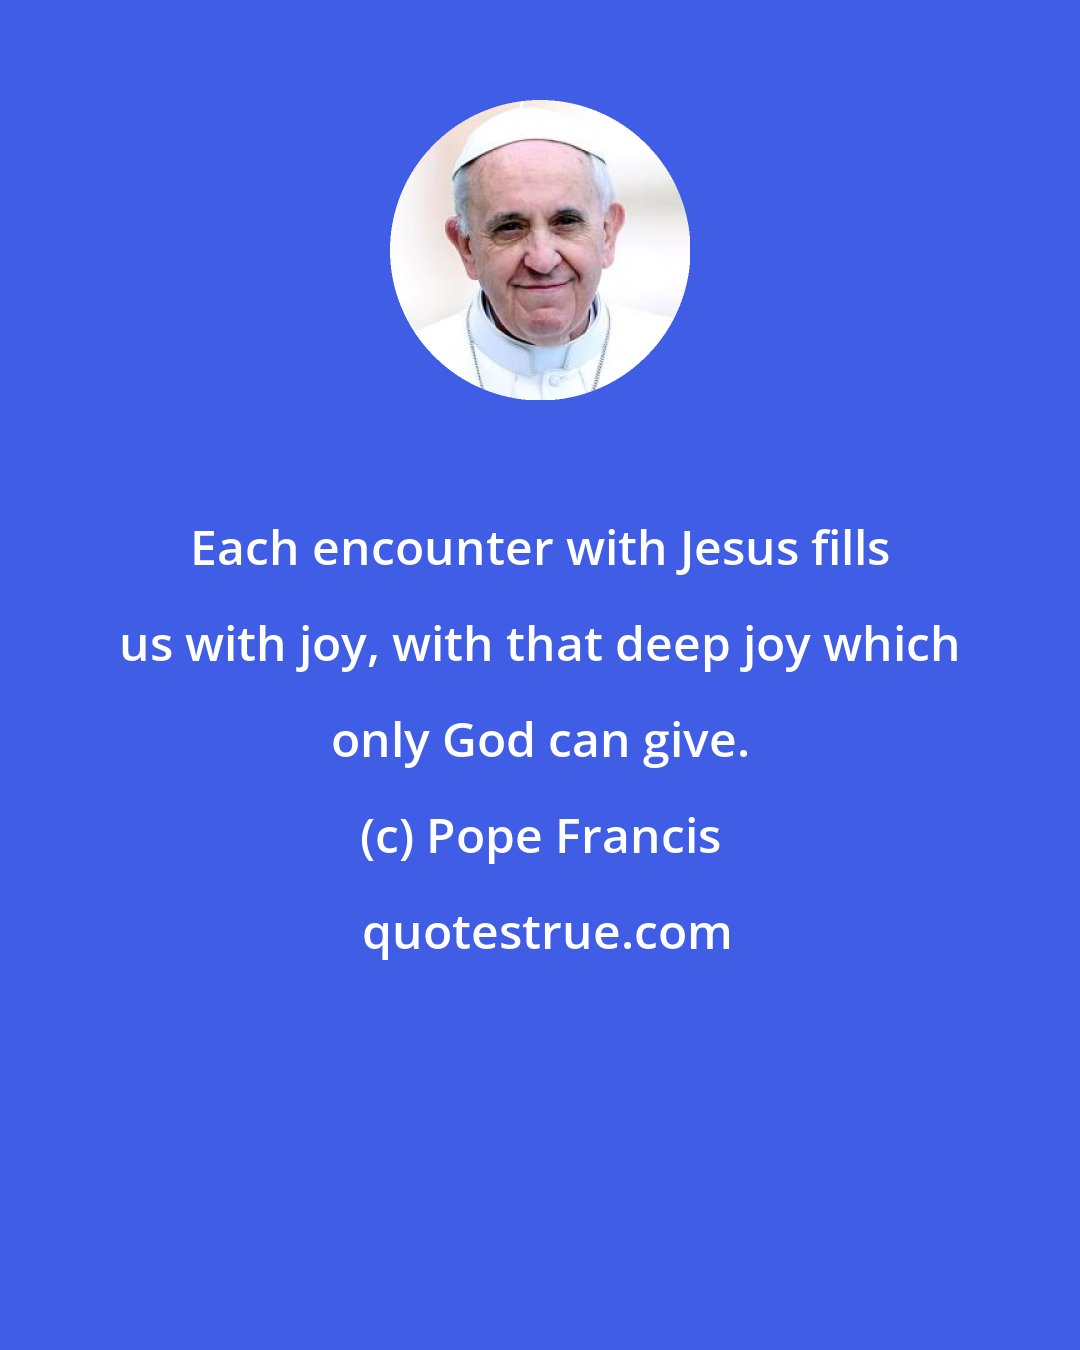 Pope Francis: Each encounter with Jesus fills us with joy, with that deep joy which only God can give.